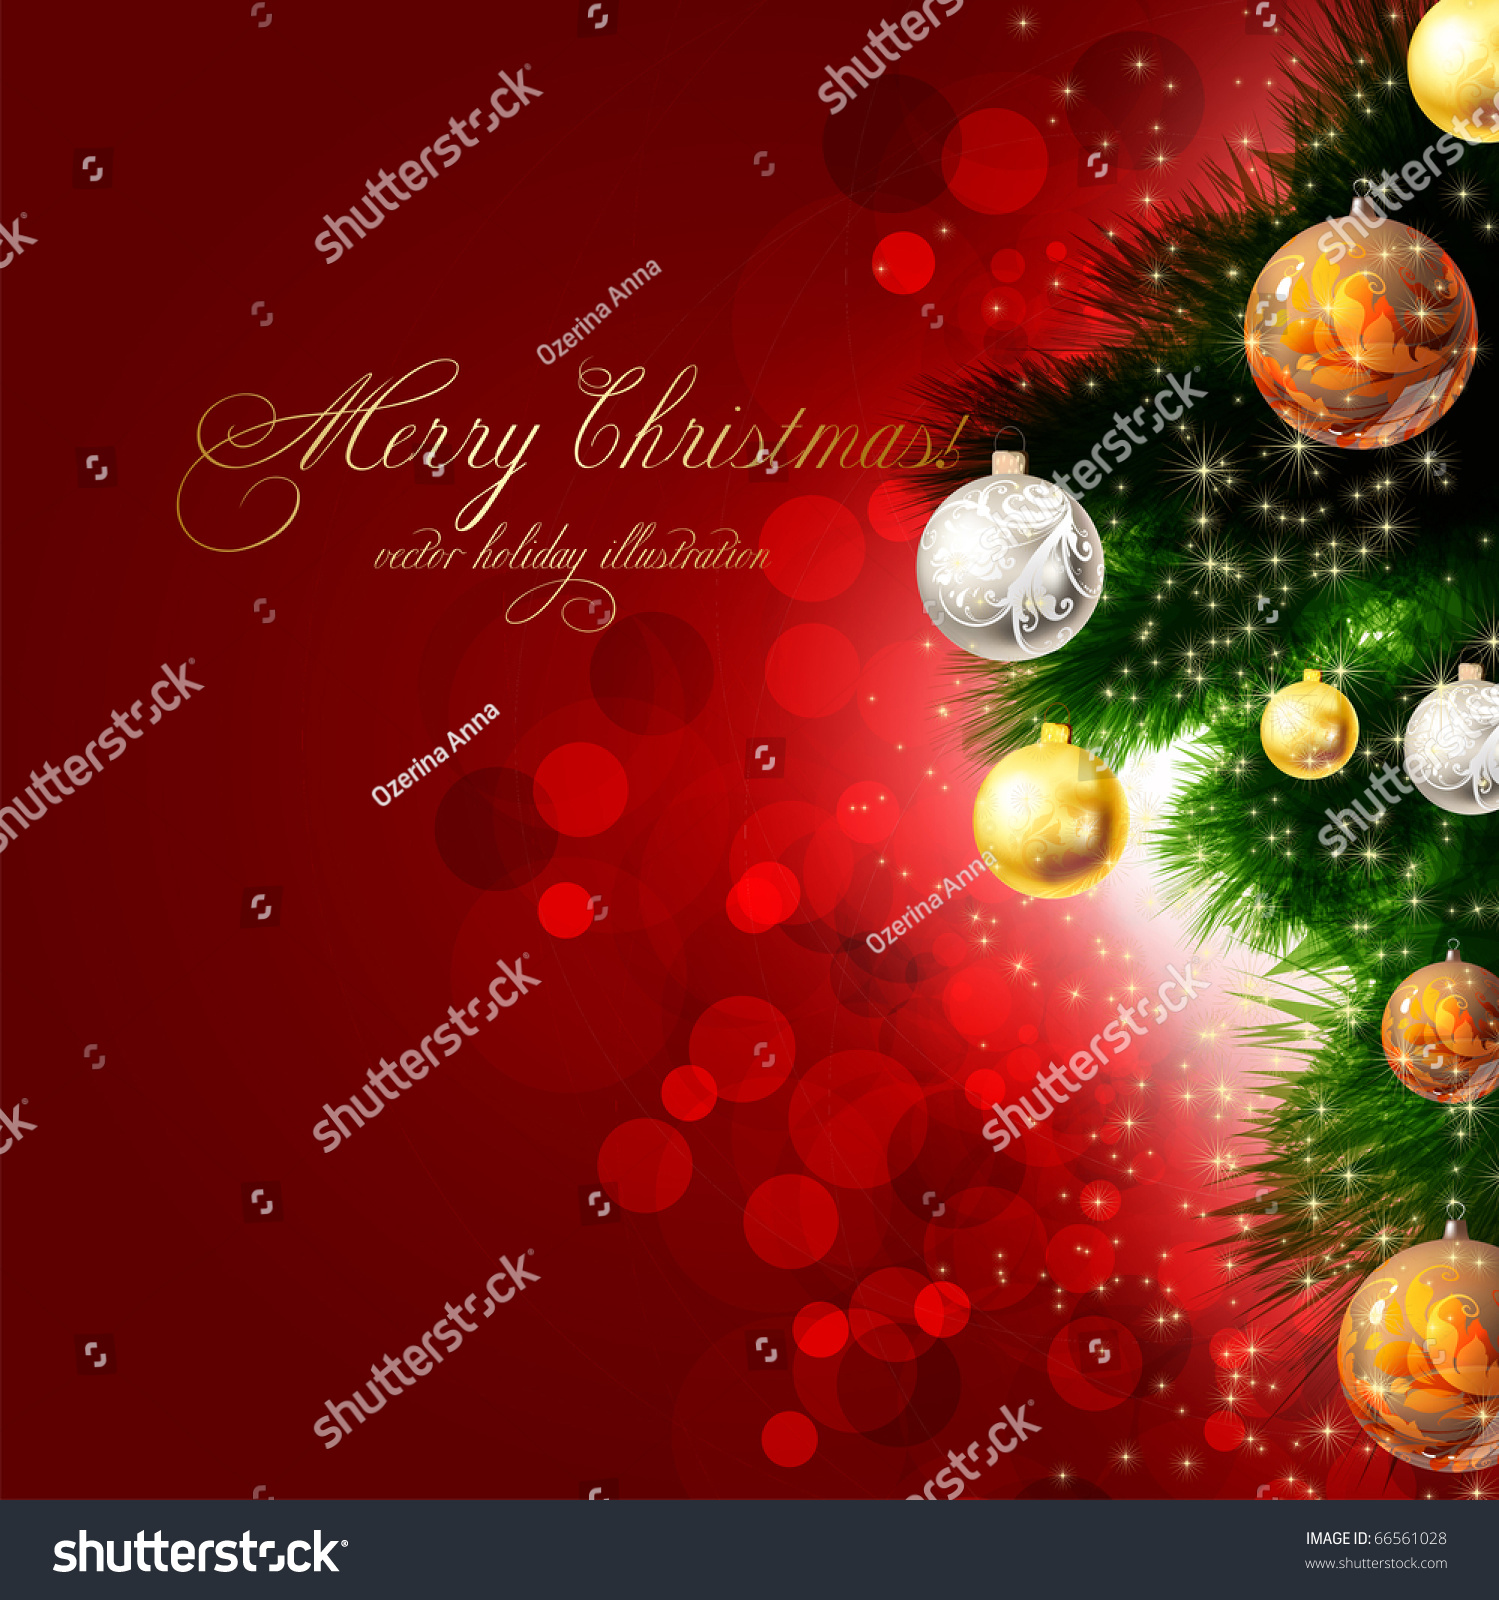 Christmas Background With Baubles And Christmas Tree Stock Vector ...